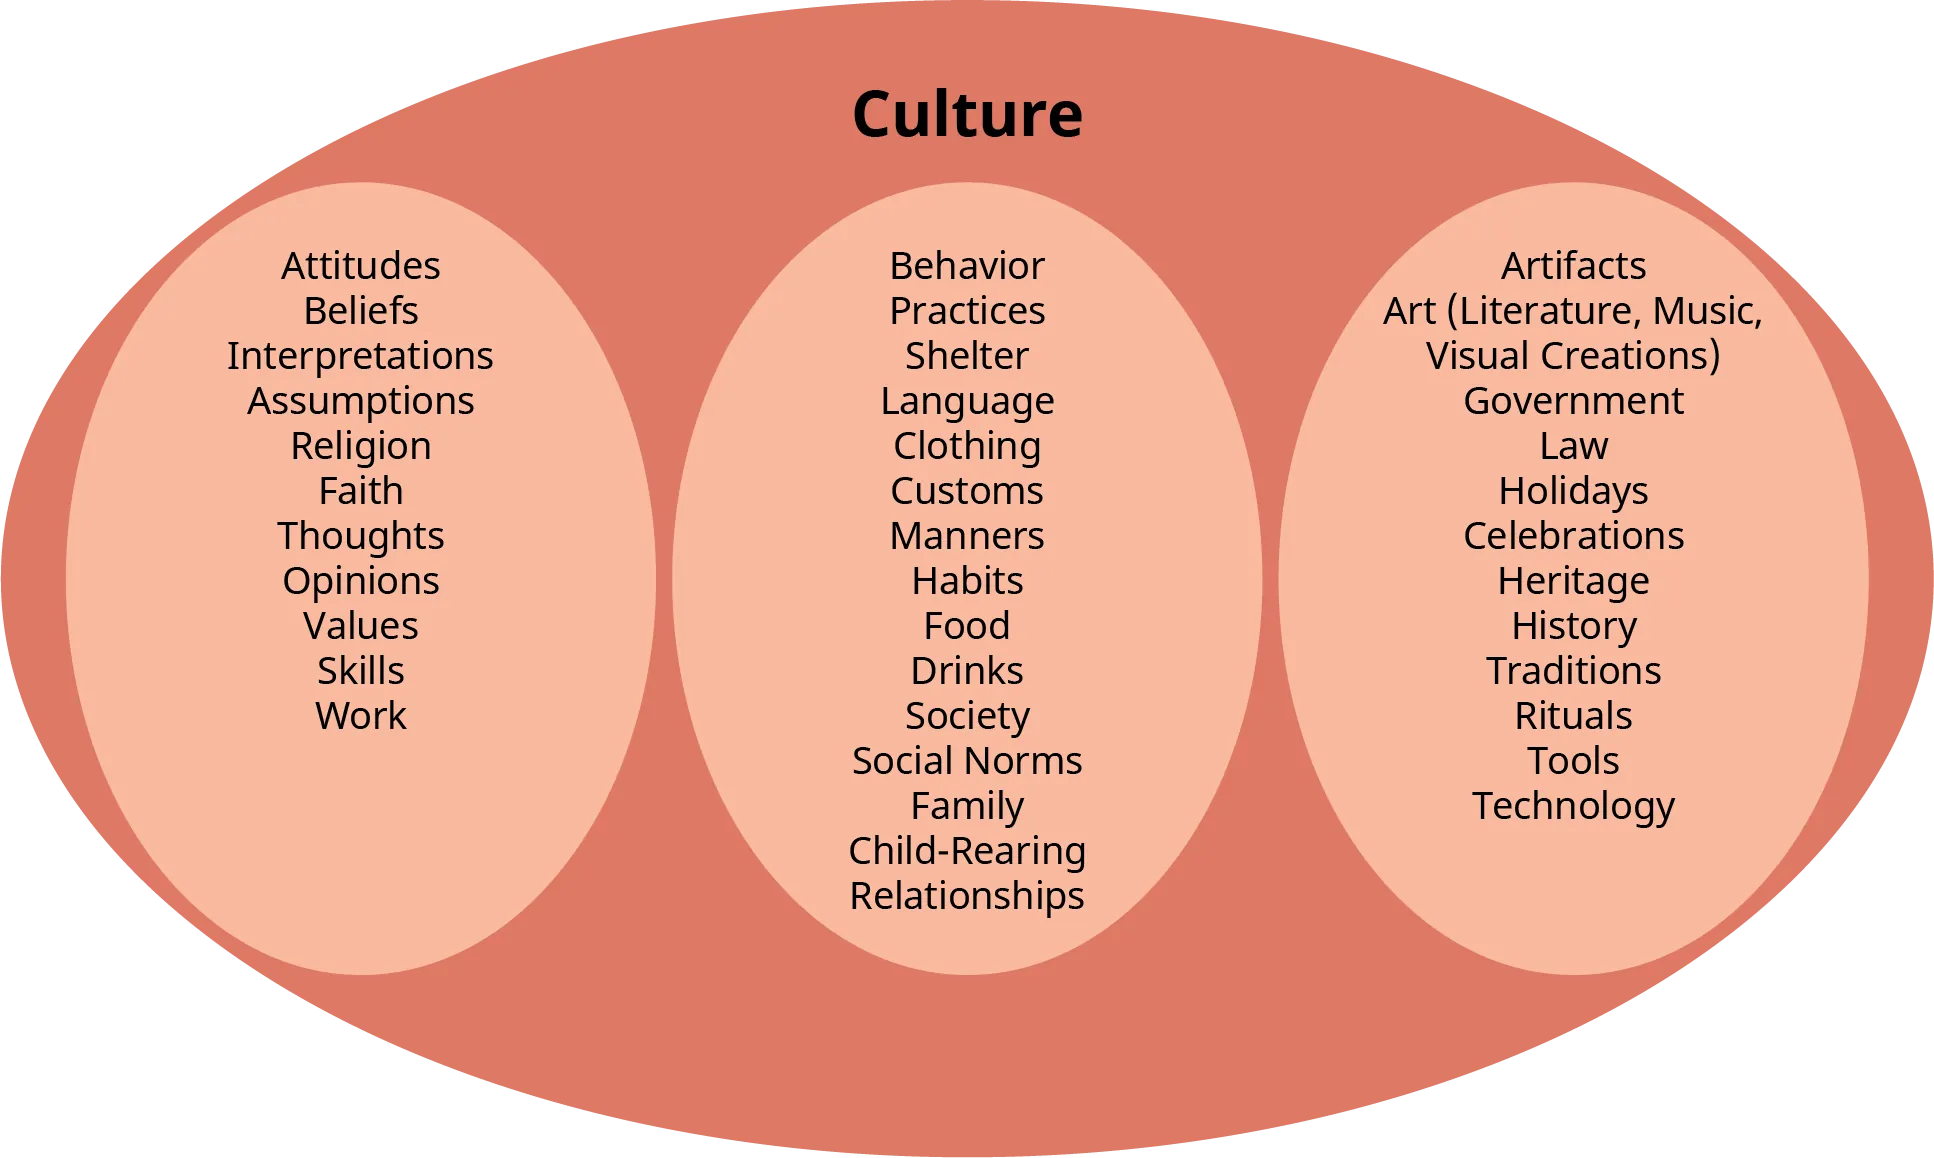 Culture includes: attitudes, beliefs, interpretations, assumptions, religion, faith, thoughts, opinions, values, skills, work, behavior, practices, shelter, language, clothing, customs, manners, habits, food, drinks, society, social norms, family, child-rearing, relationships, artifacts, art (including literature, music, and visual creations), government, law, holidays, celebrations, heritage, history, traditions, rituals, tools, and technology.